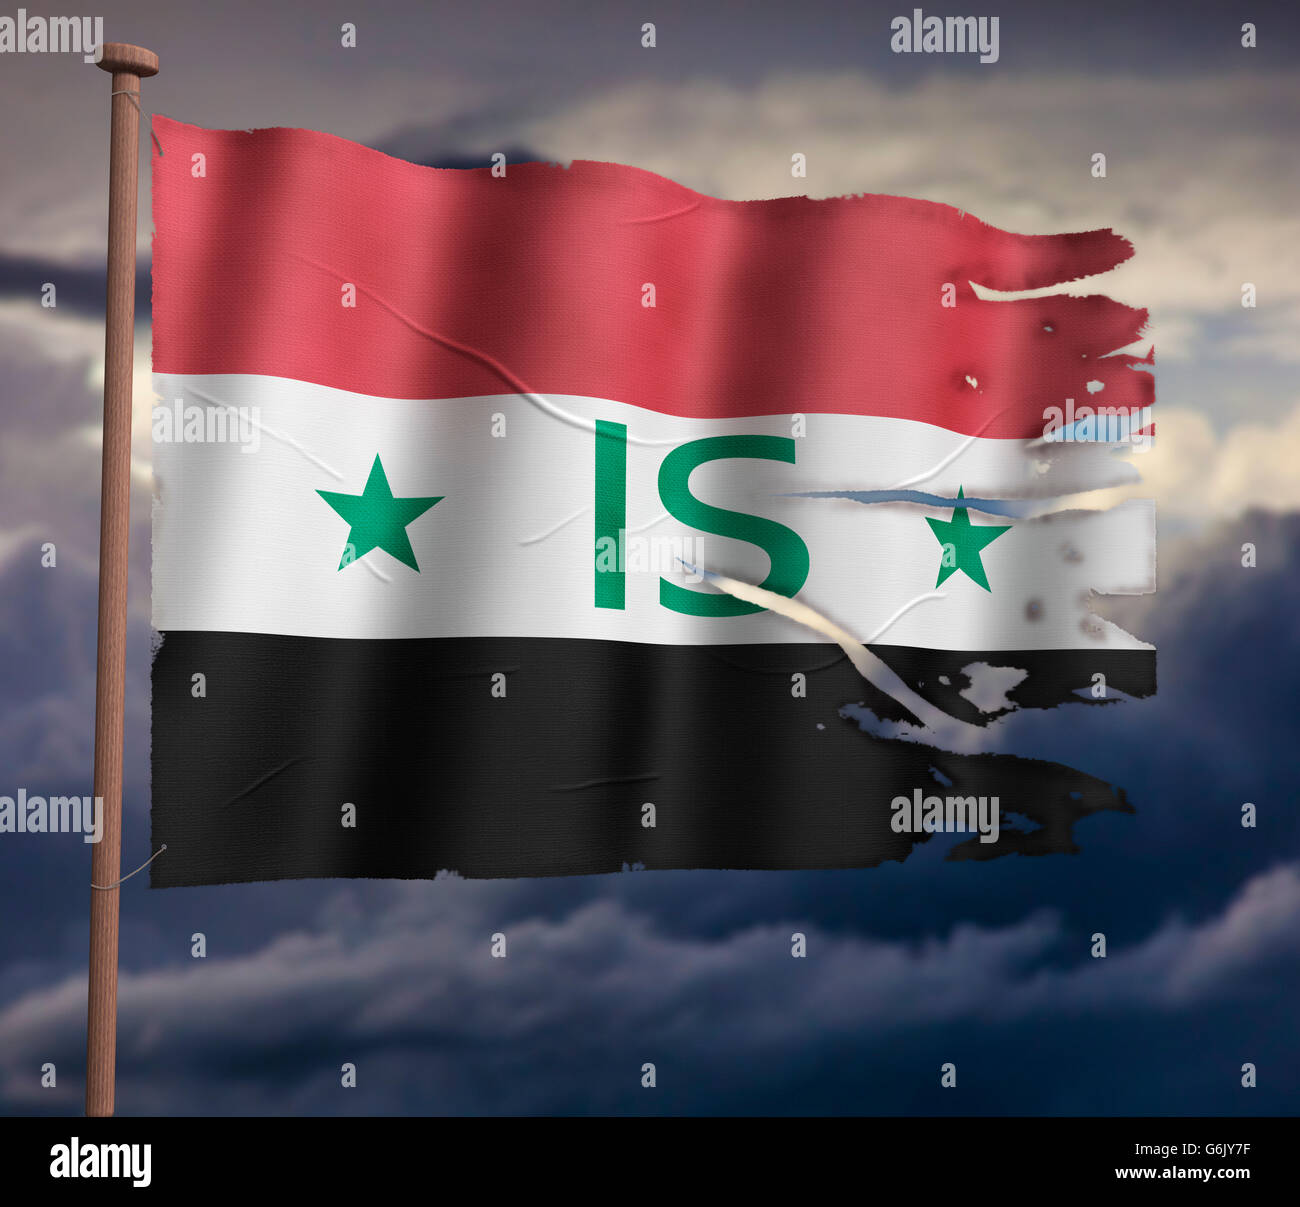 Syrian Flag with IS writing, Computer Graphic Stock Photo